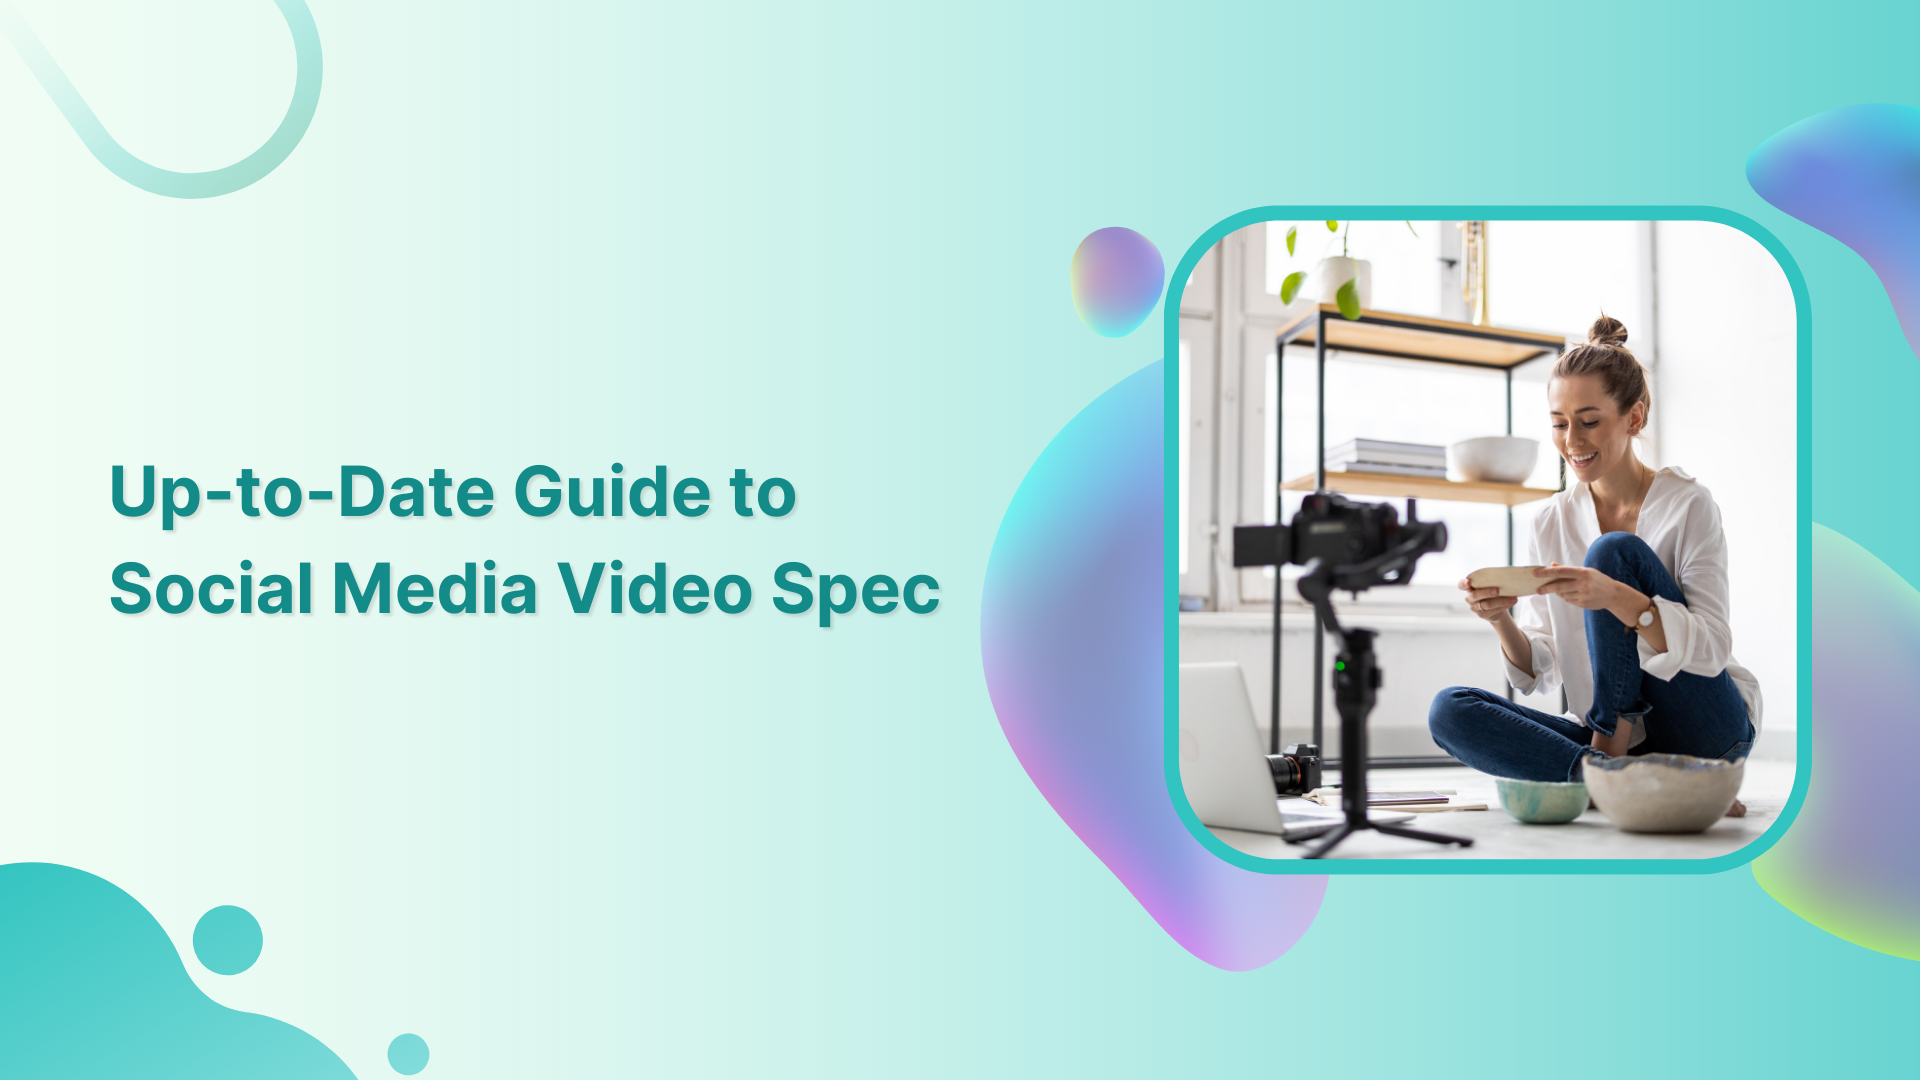 Up-to-Date Guide to Social Media Video Specs